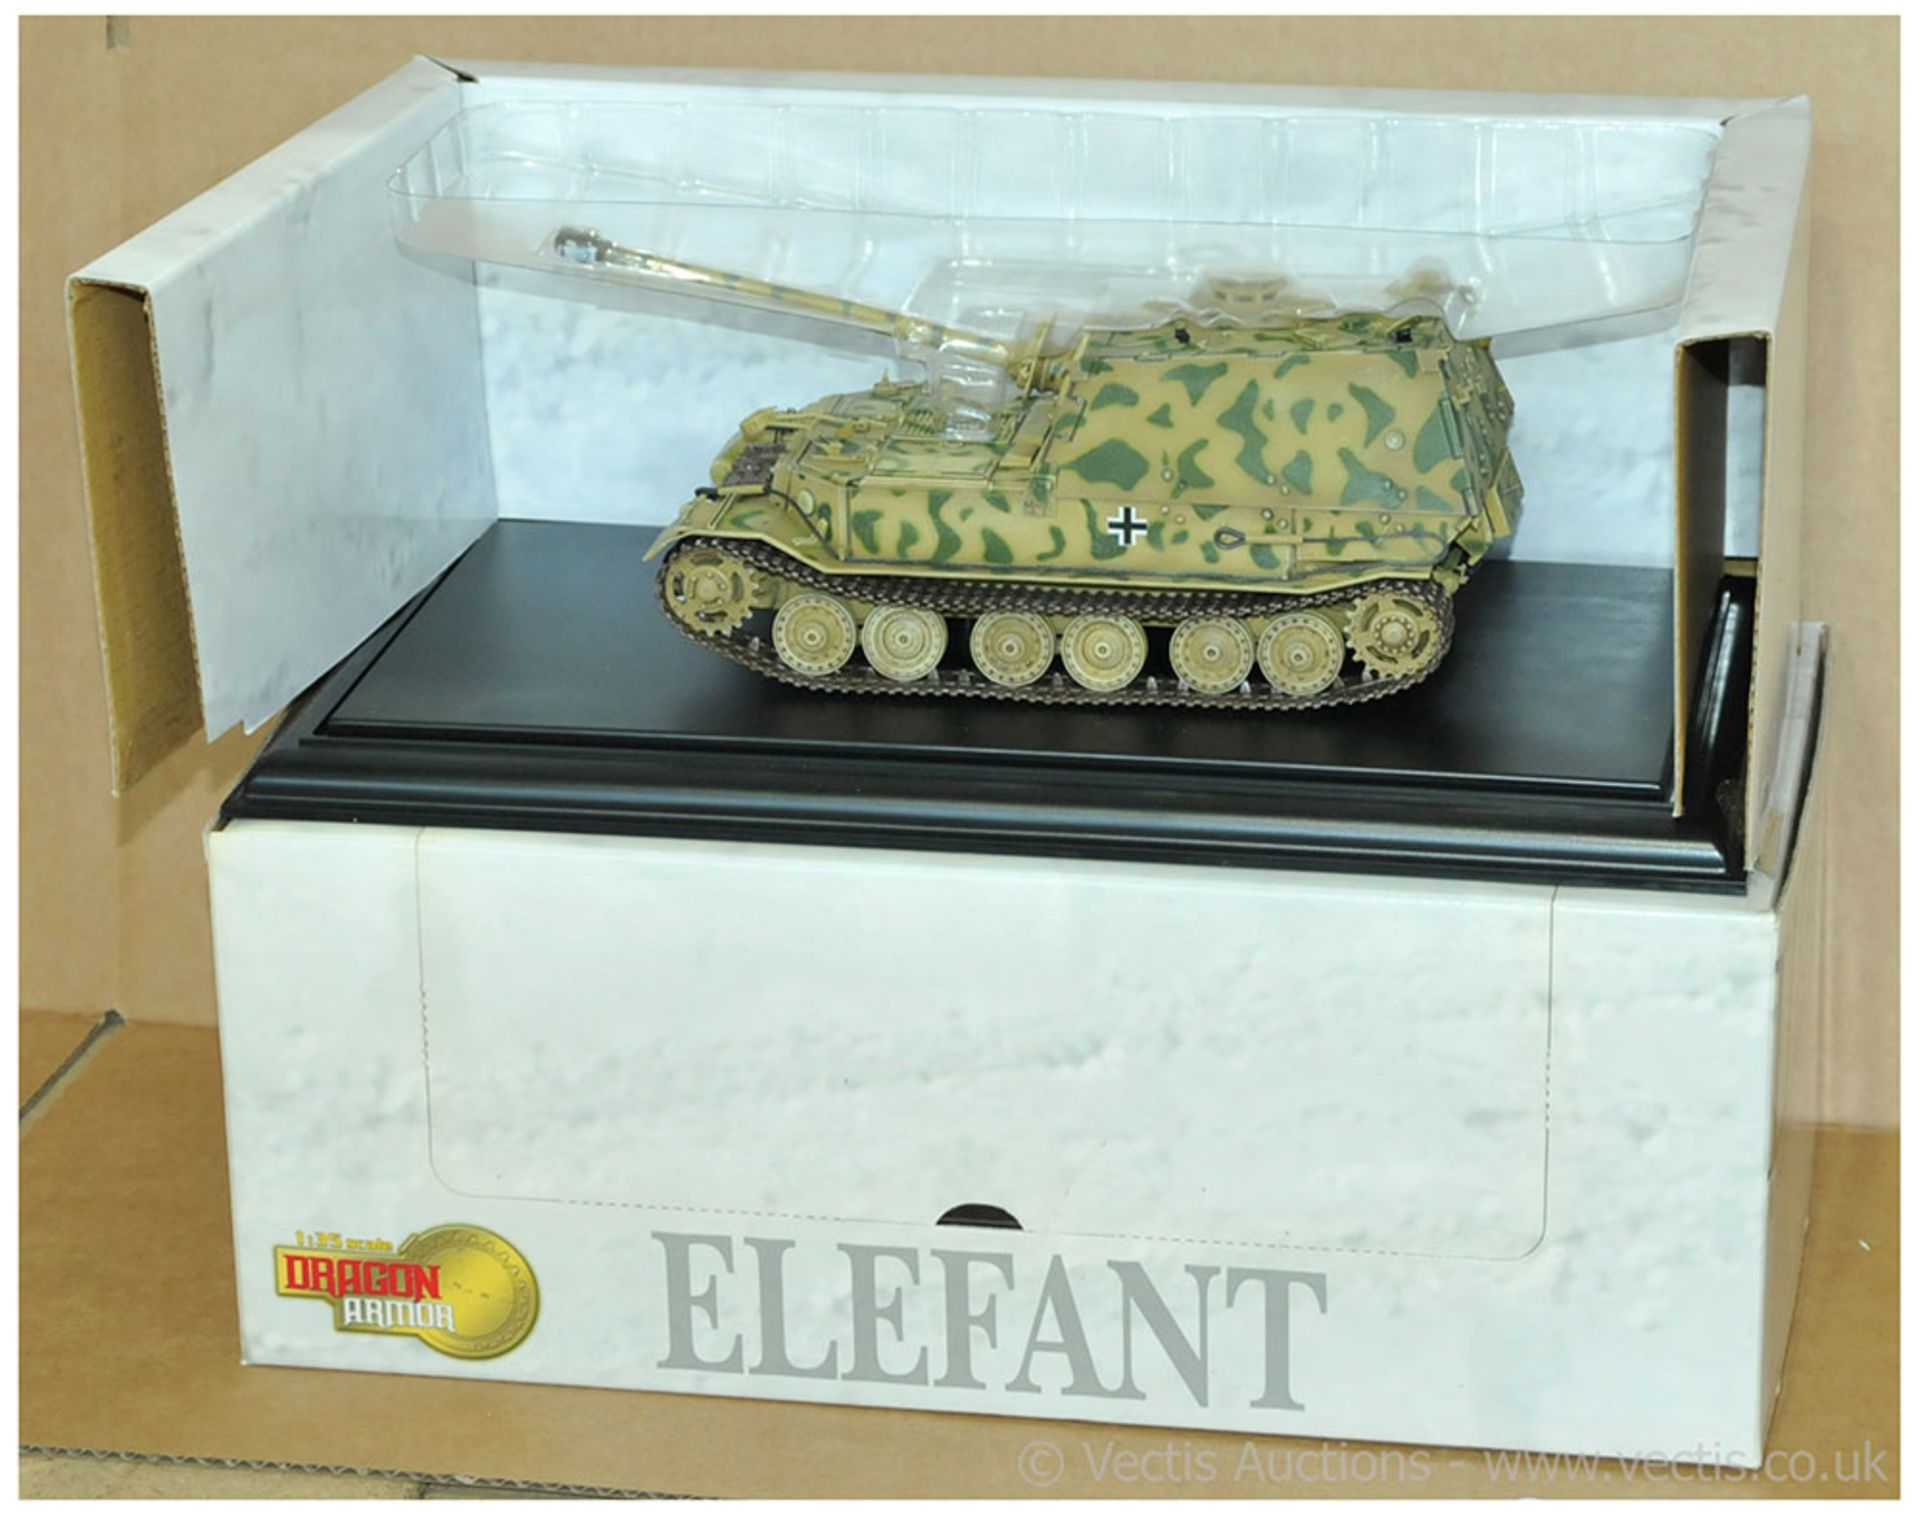 Dragon Armour boxed 1/35 scale 61004 Elephant